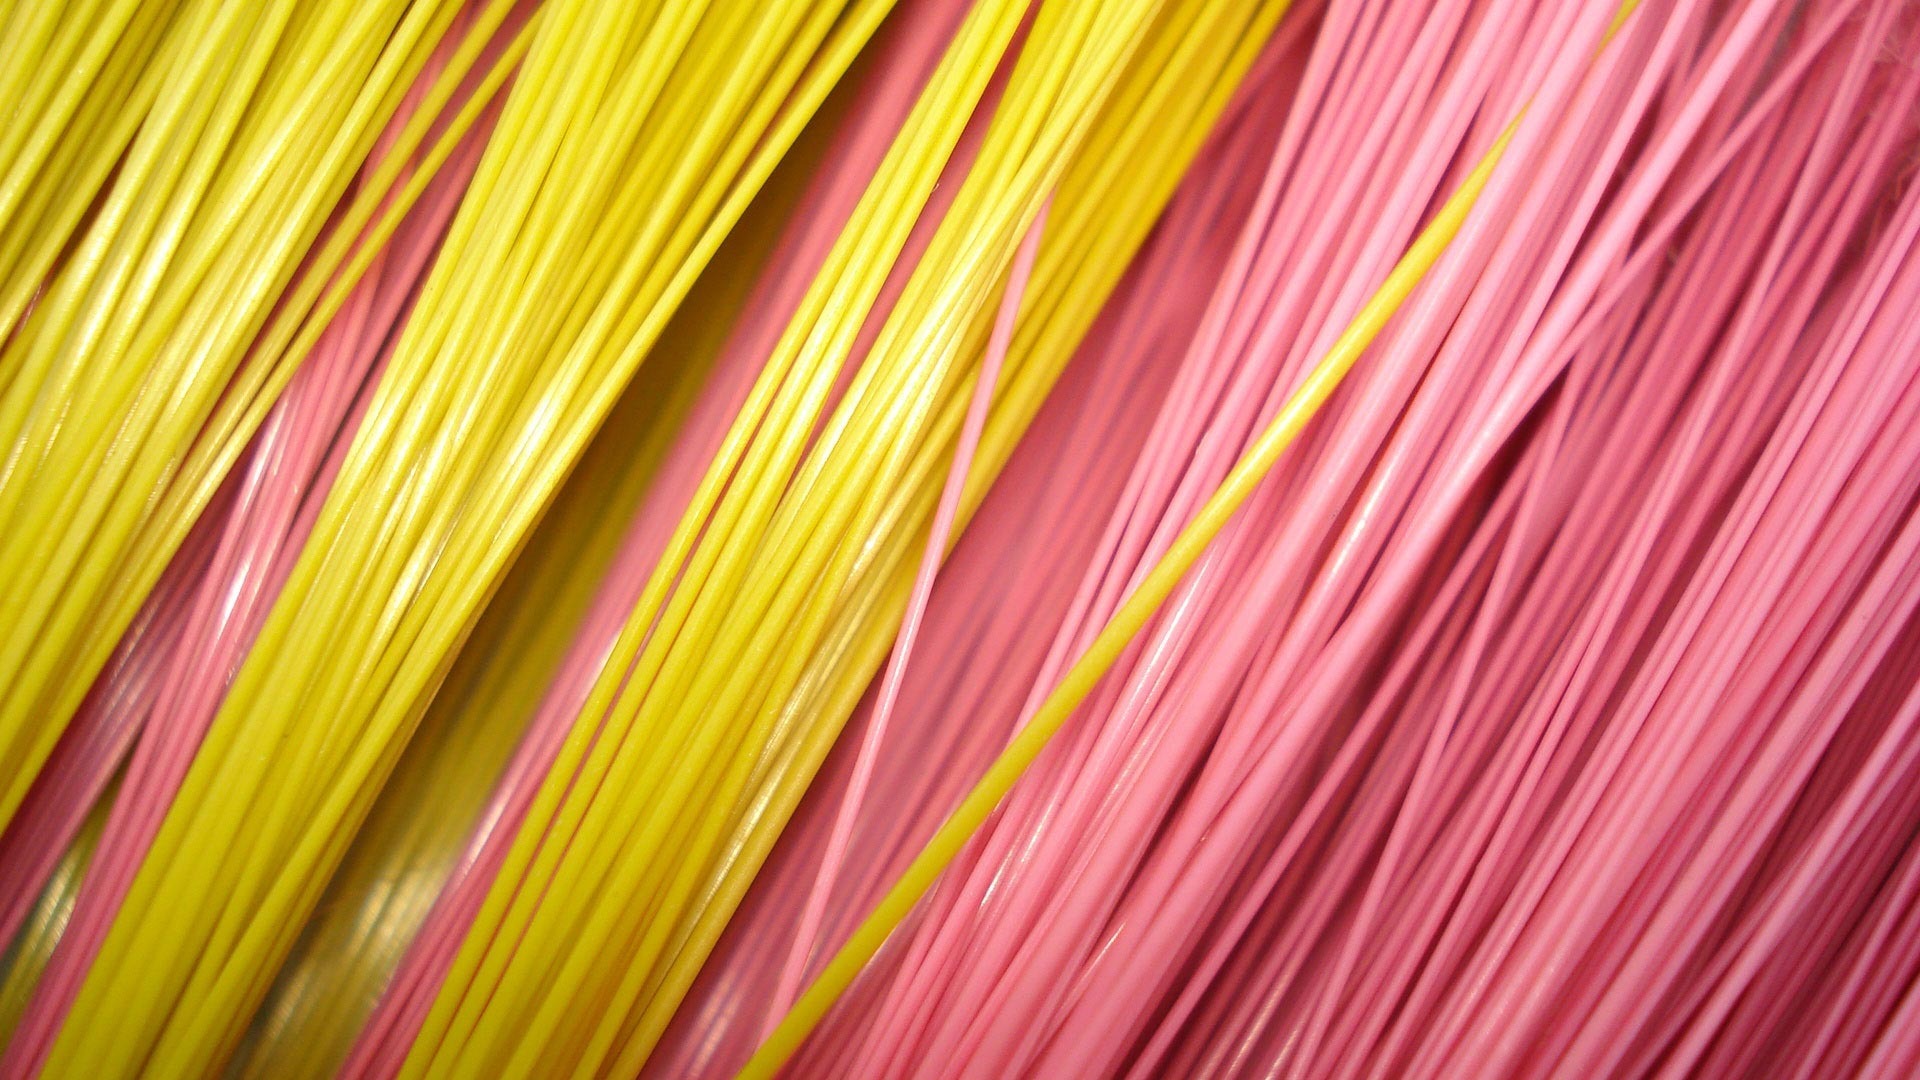 Pink And Yellow Wires Wallpaper